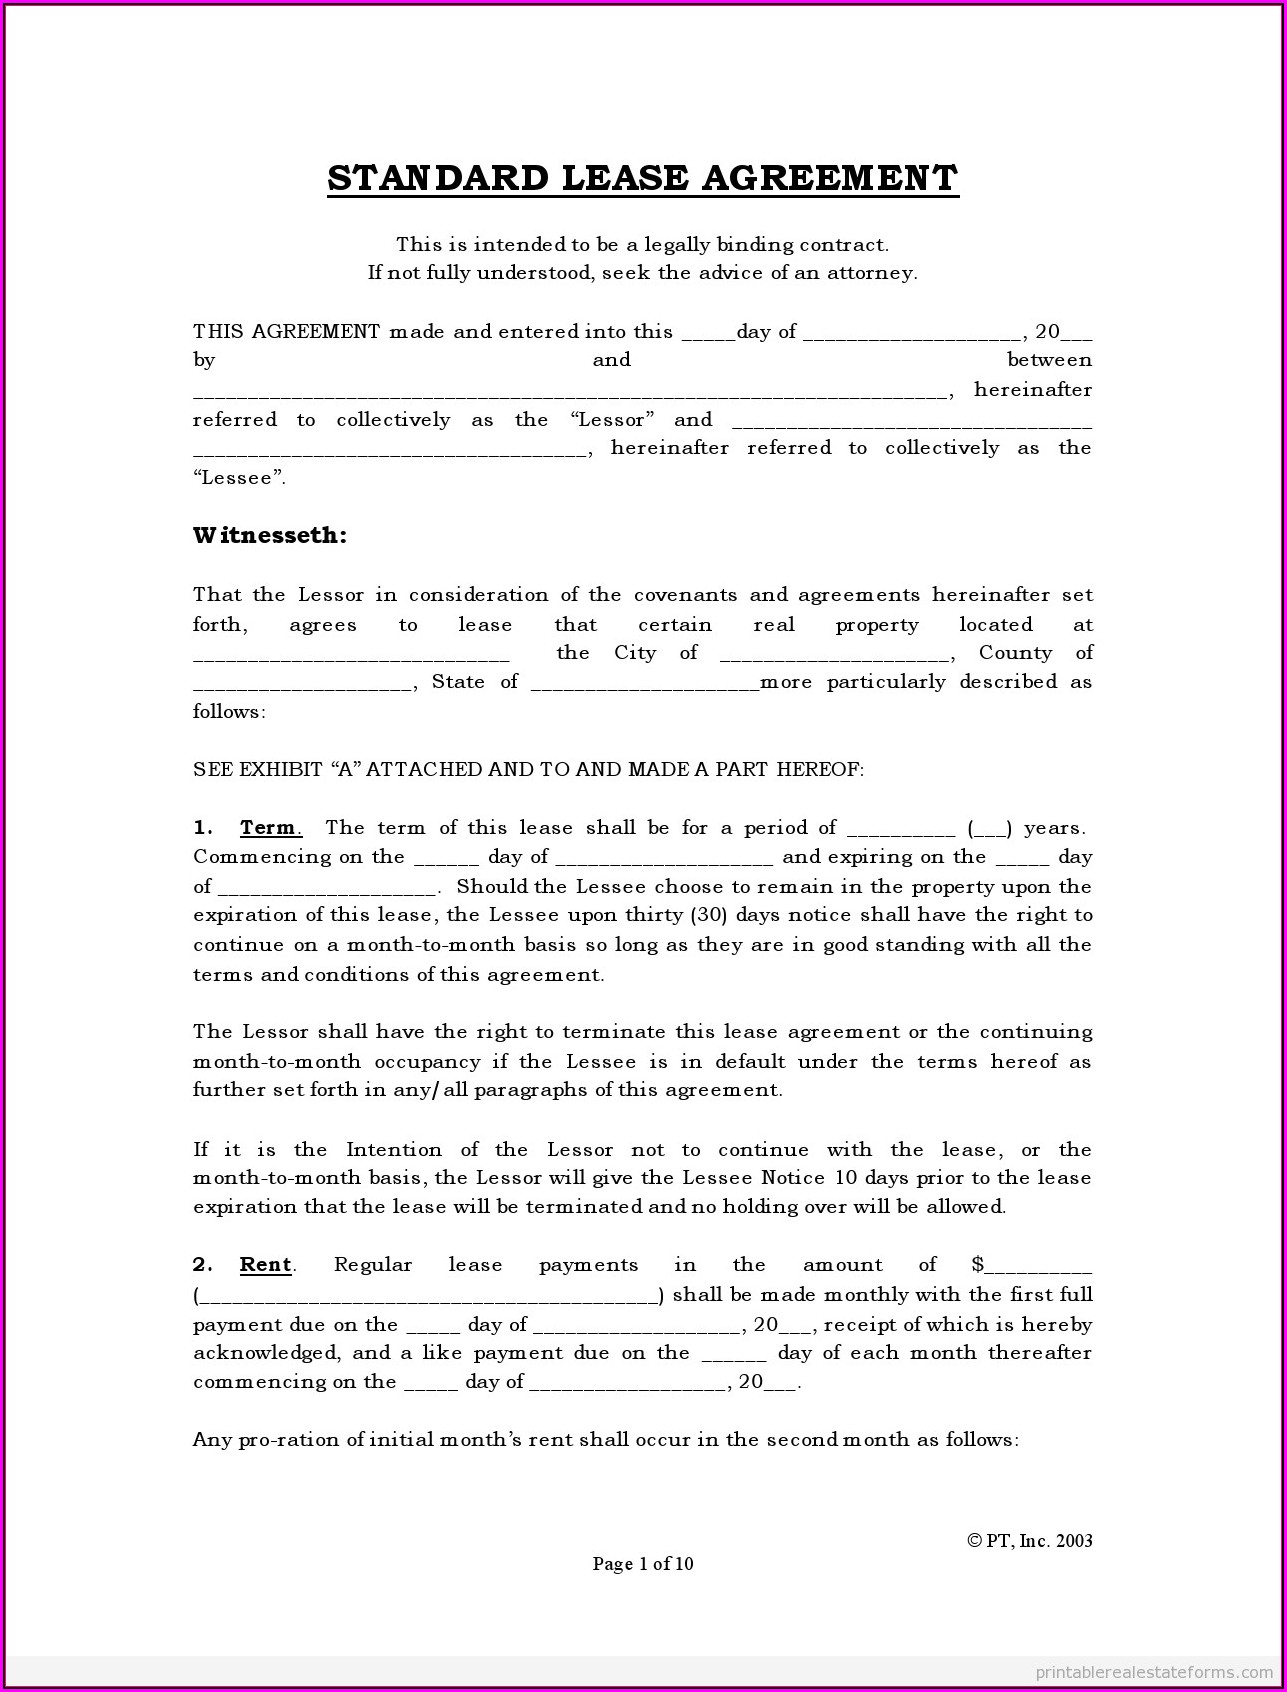 free-lease-agreements-forms-printable-form-resume-examples-a19xn7ov4k